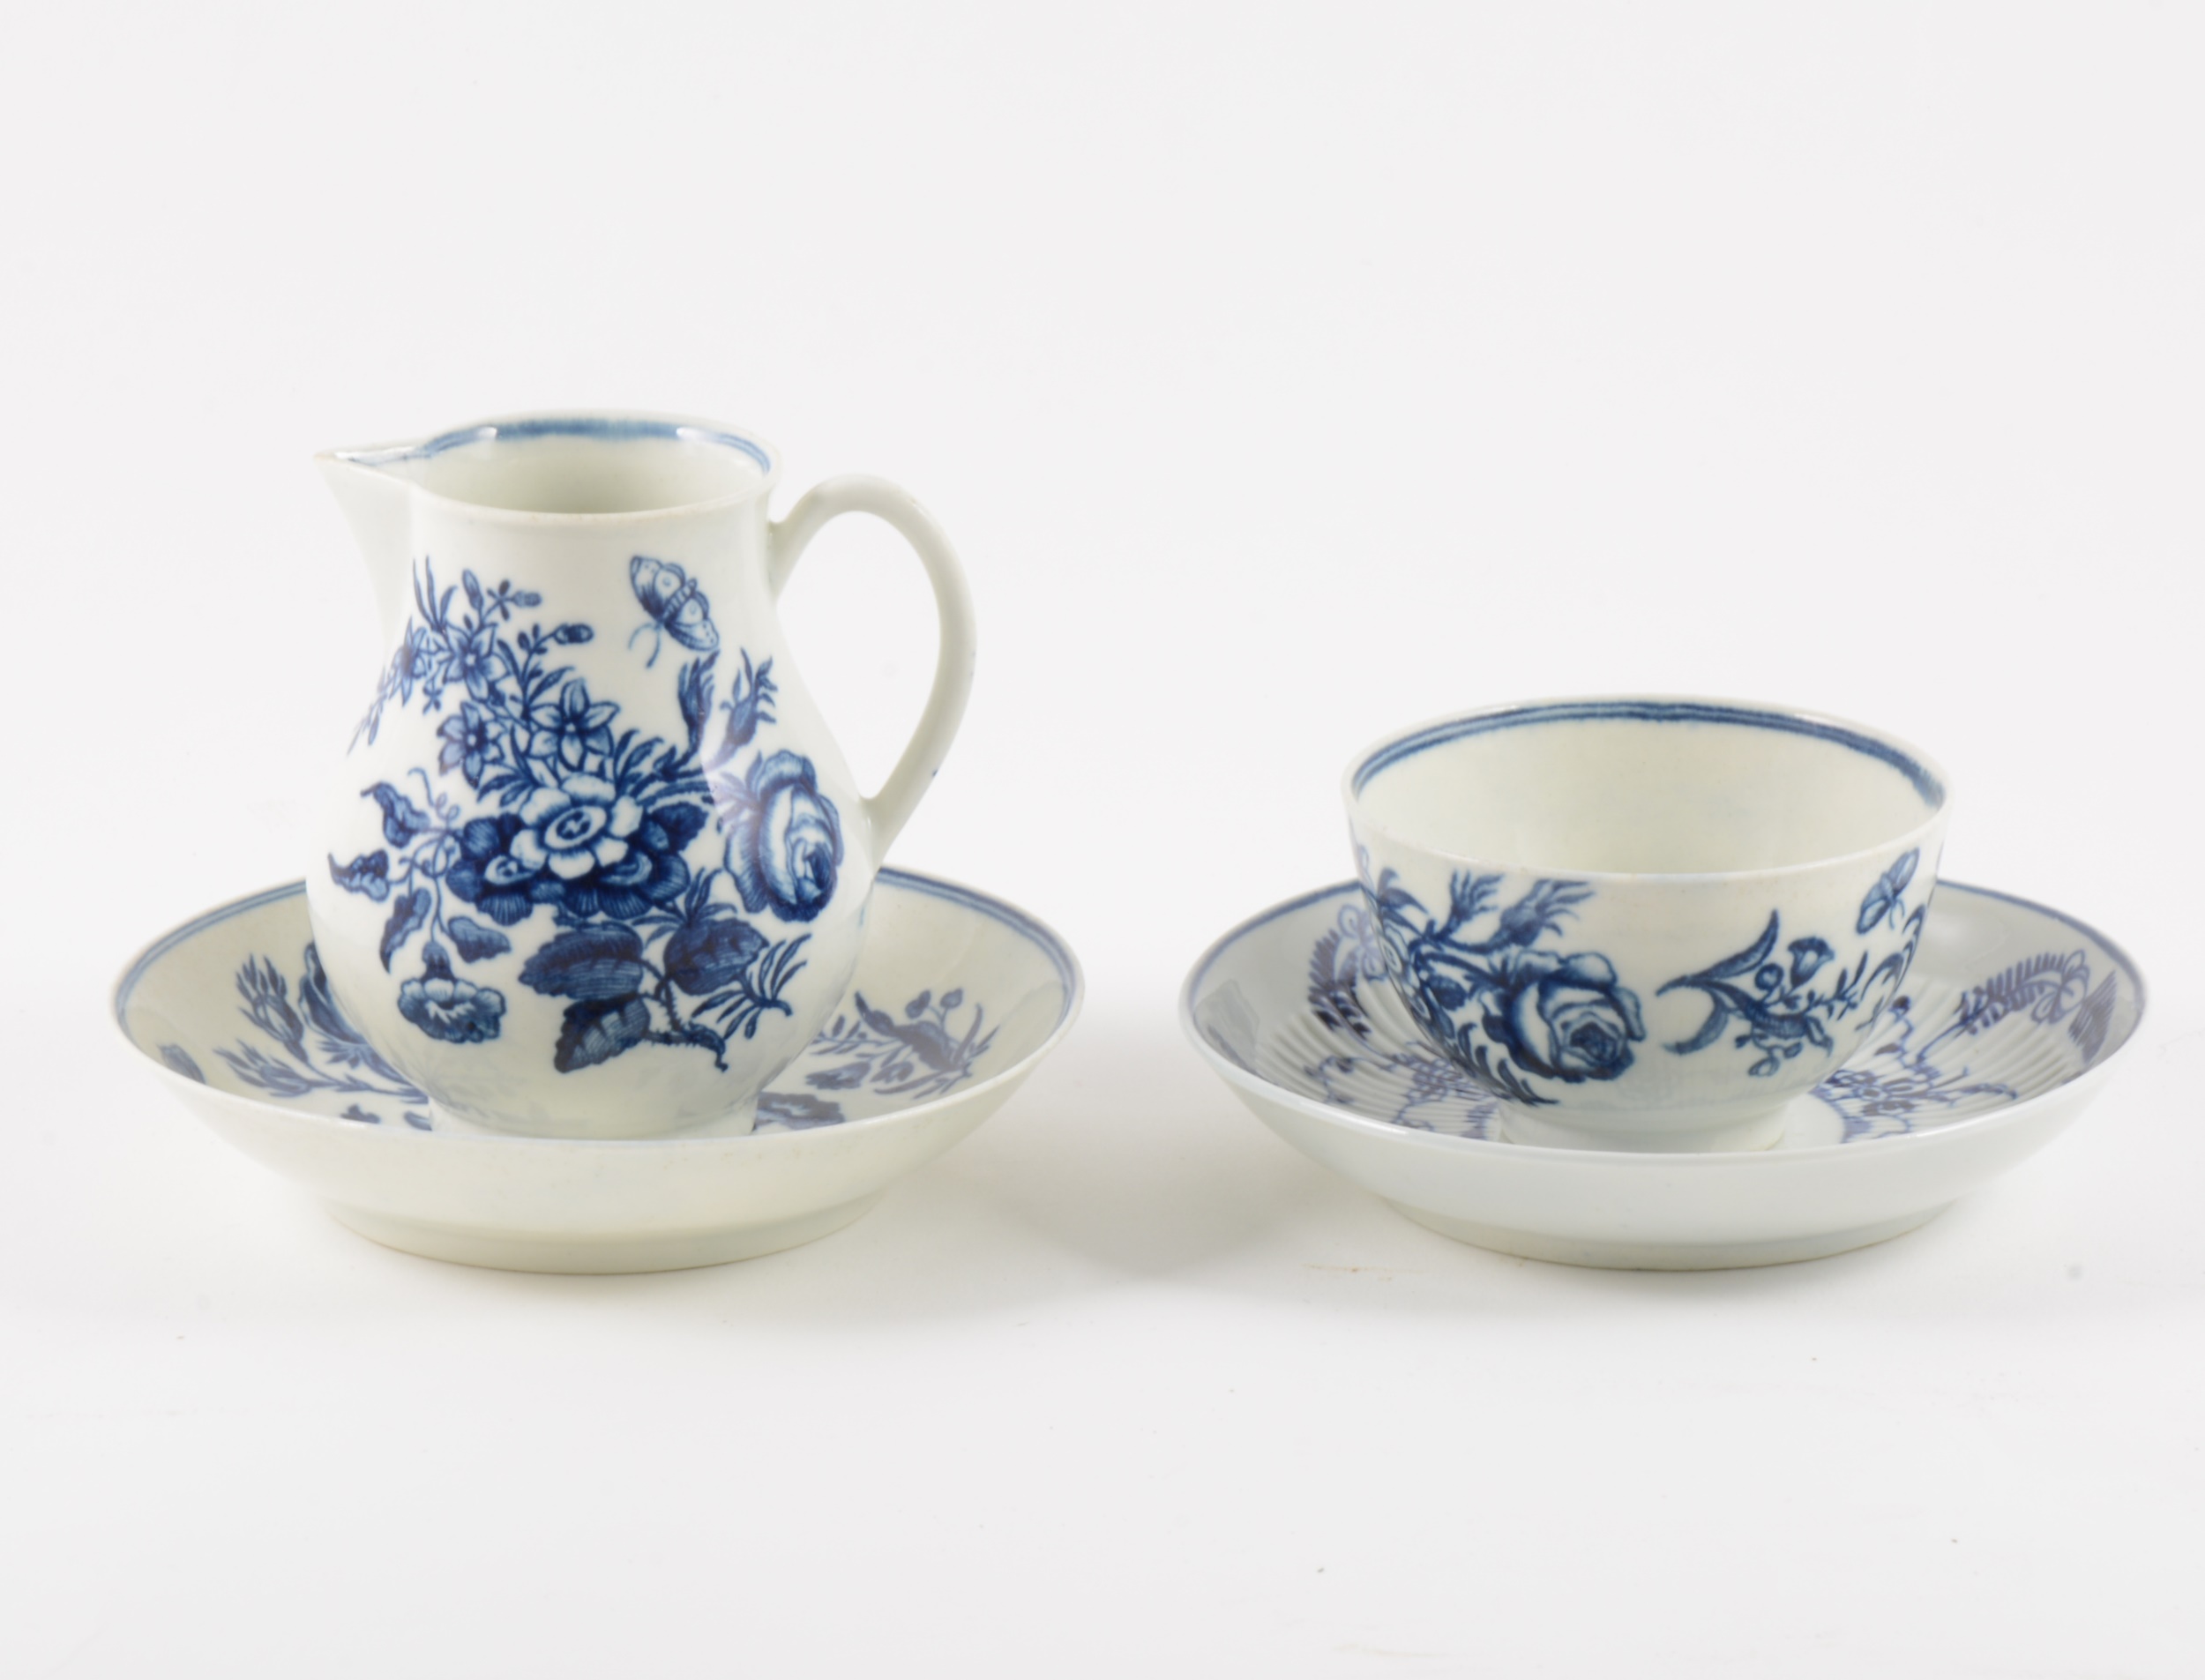 A Worcester blue and white porcelain sparrow-beak jug, matching teabowl and saucer, and another